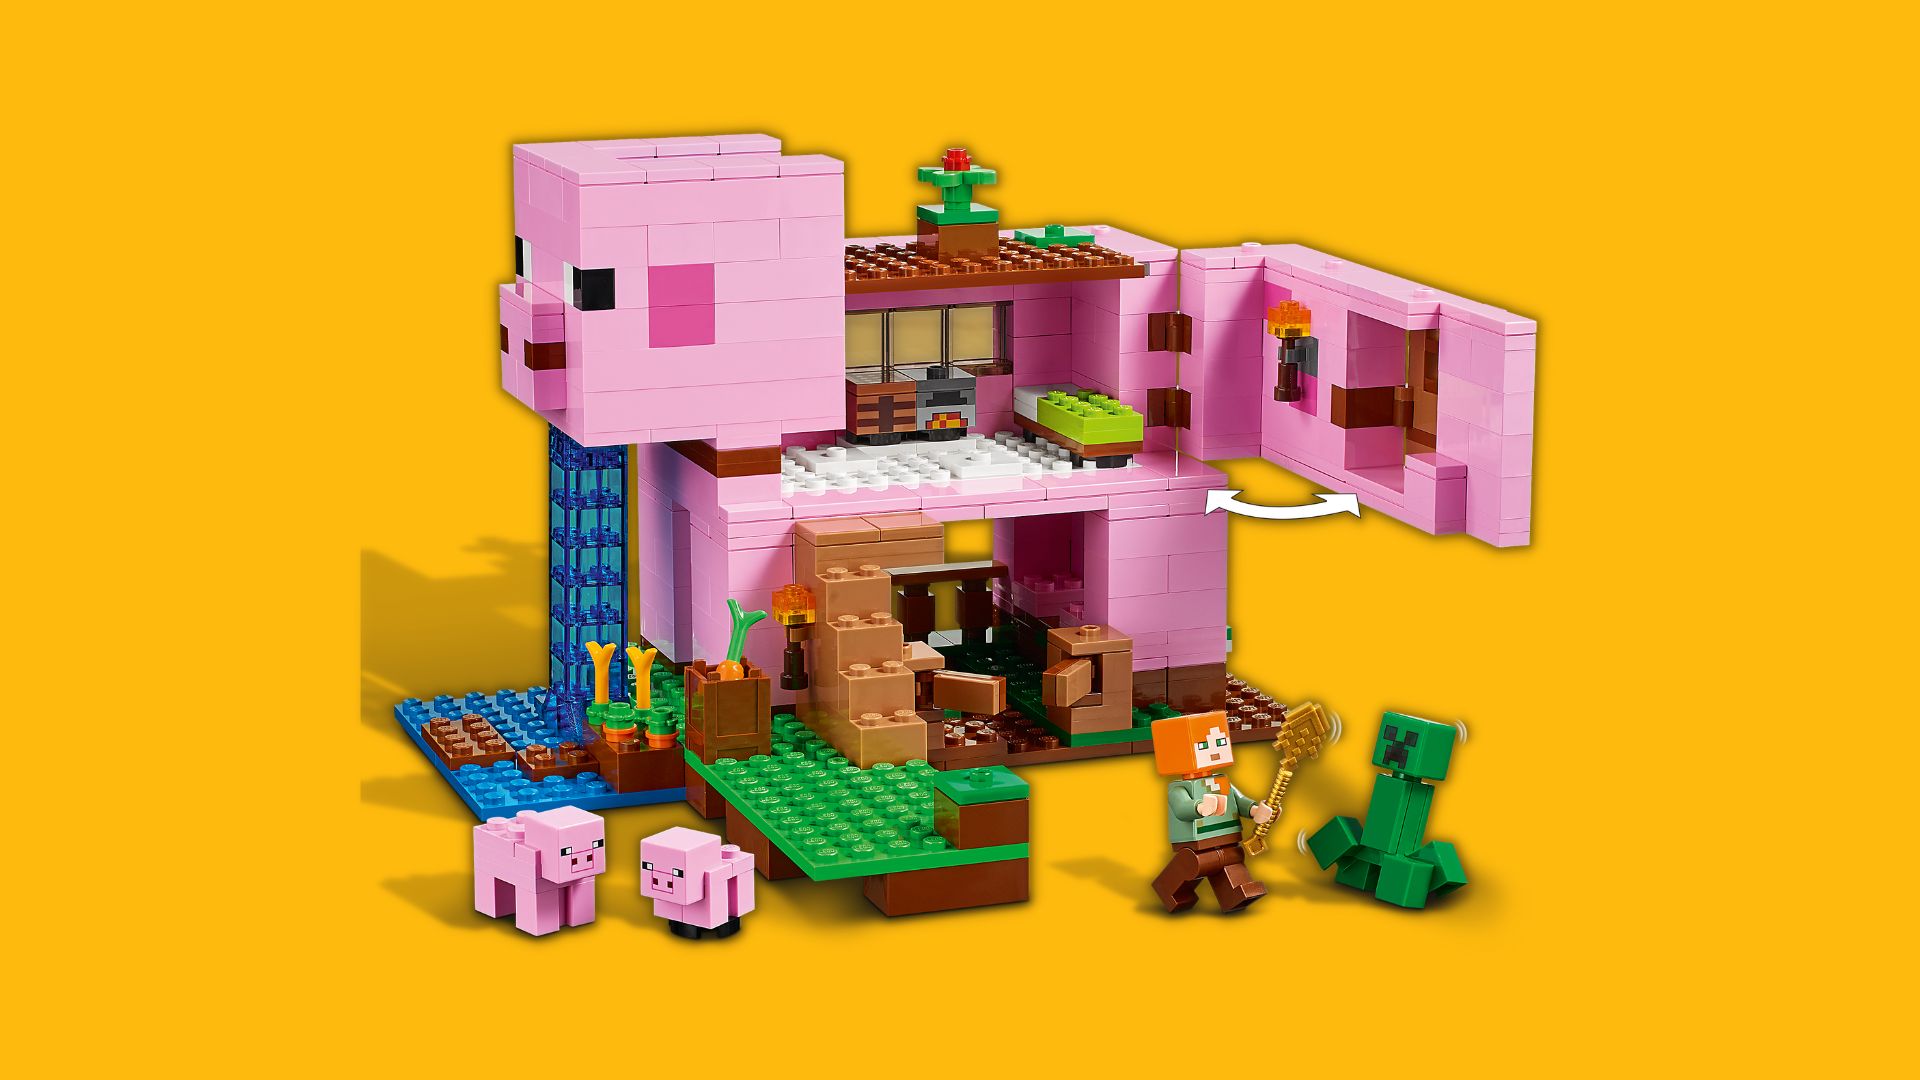 The best Minecraft Lego sets and toys